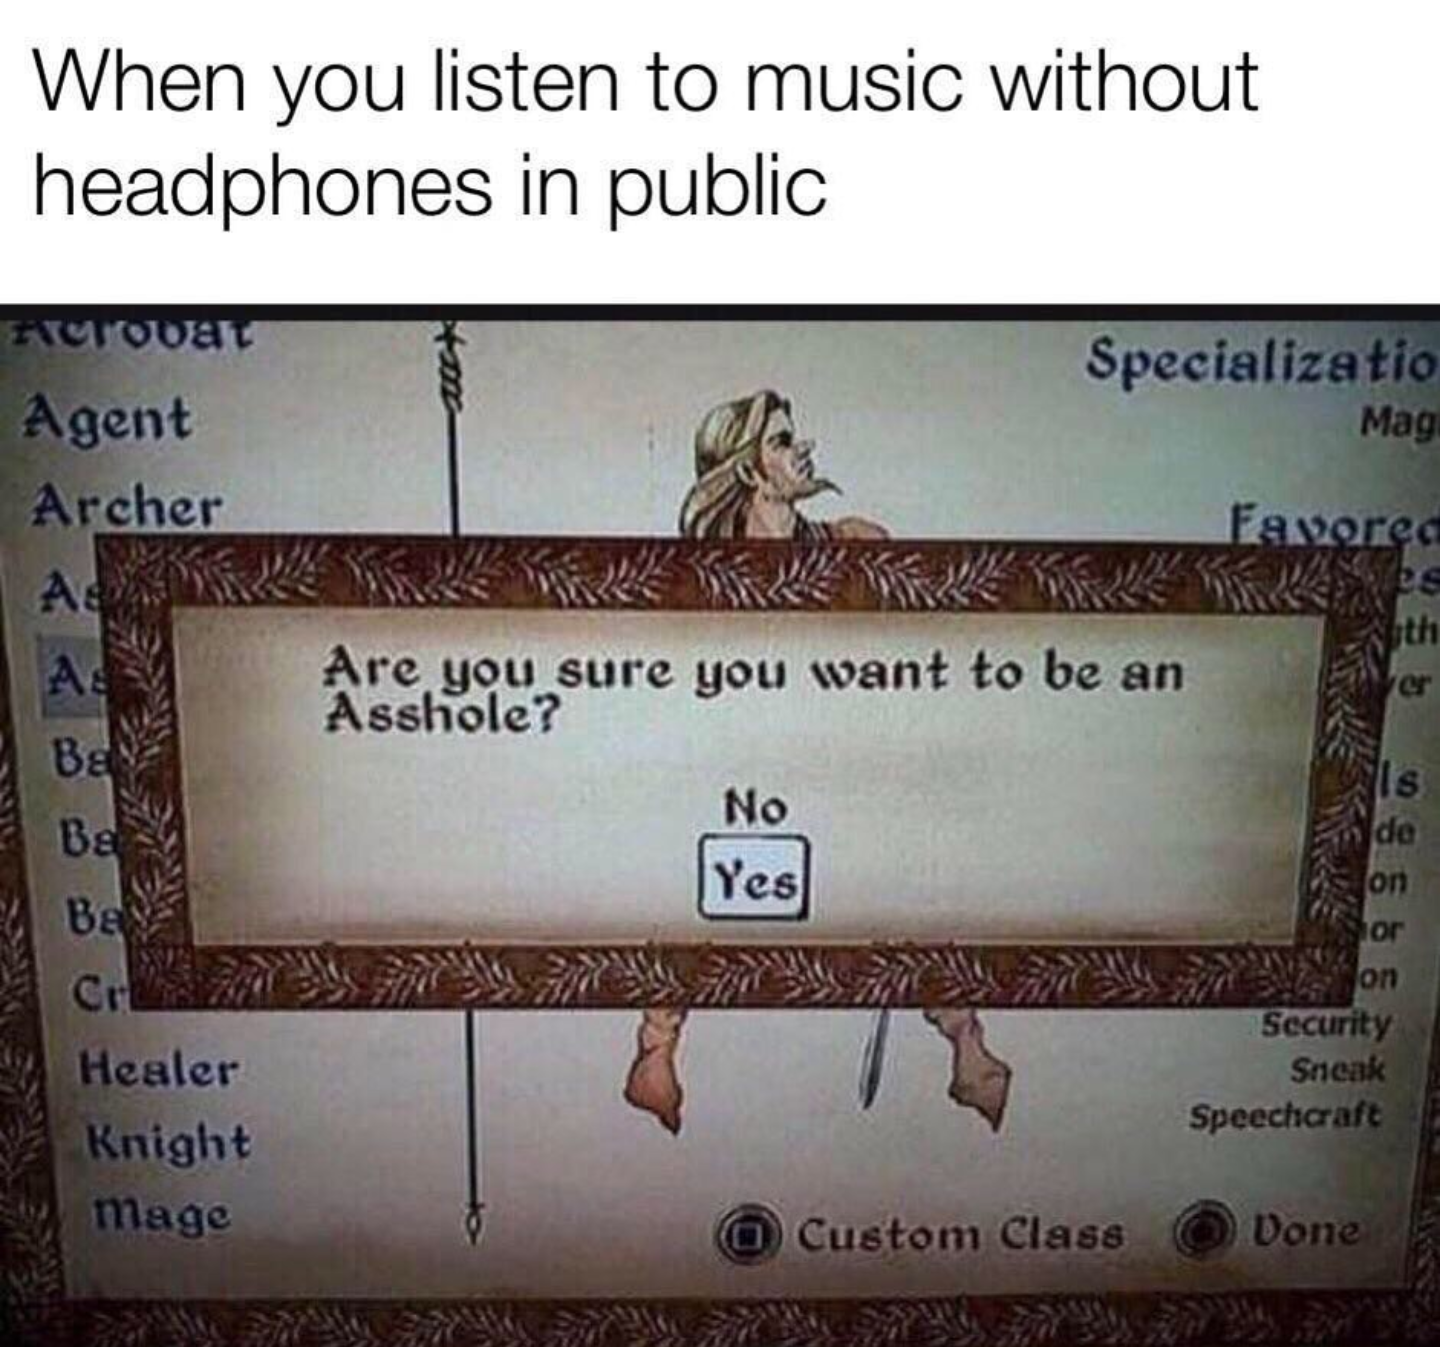 chaotic neutral dm - When you listen to music without headphones in public Rulovat Agent Archer Specializatio Mag Favored es Are you sure you want to be an Asshole? No Bay Be Ba Security Sneak Speechcraft Healer Knight mage @ Custom Class Done